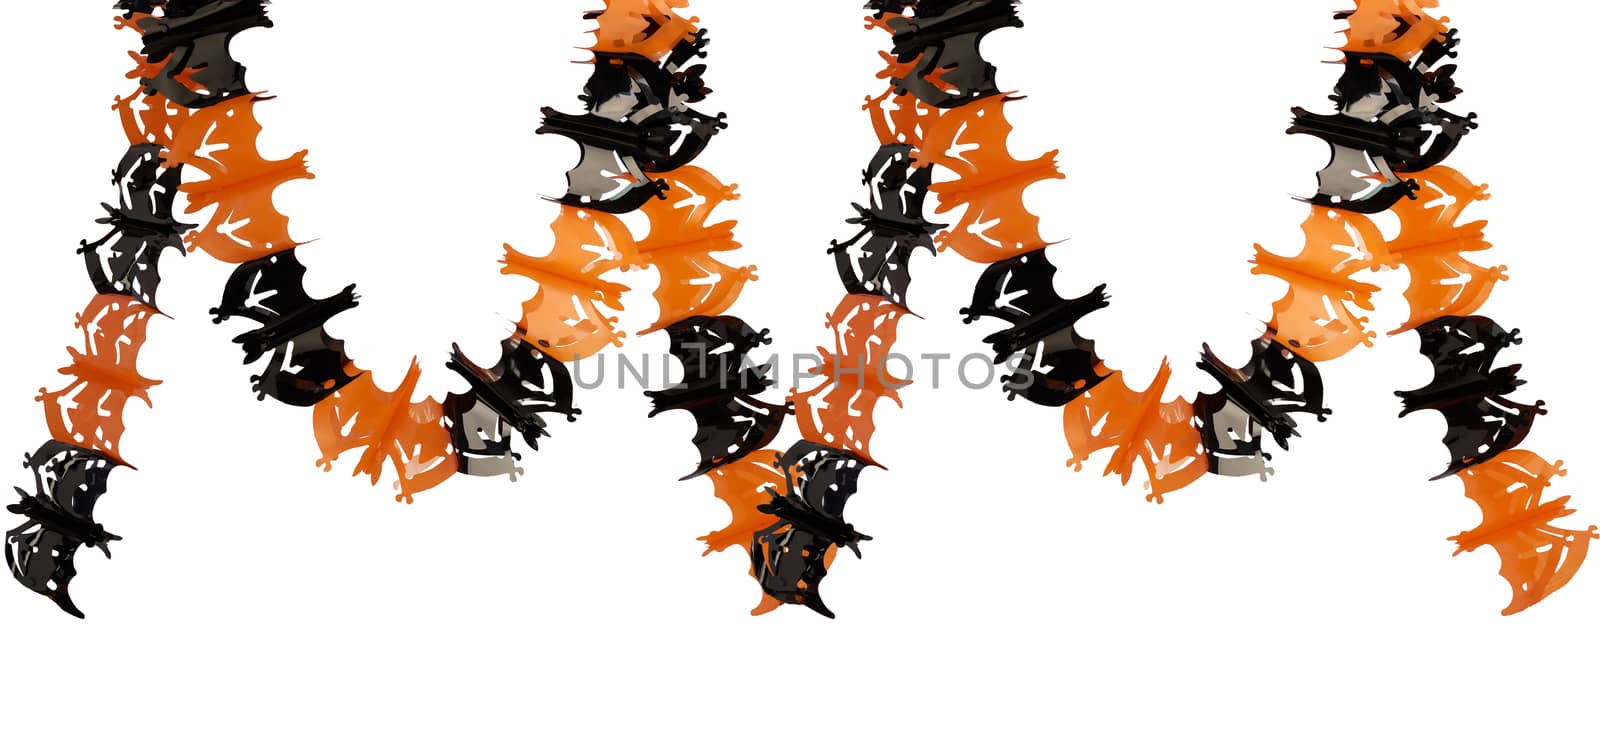 plastic garland on with bat figures cut out, the object is isolated on a white background, backdrop for Halloween